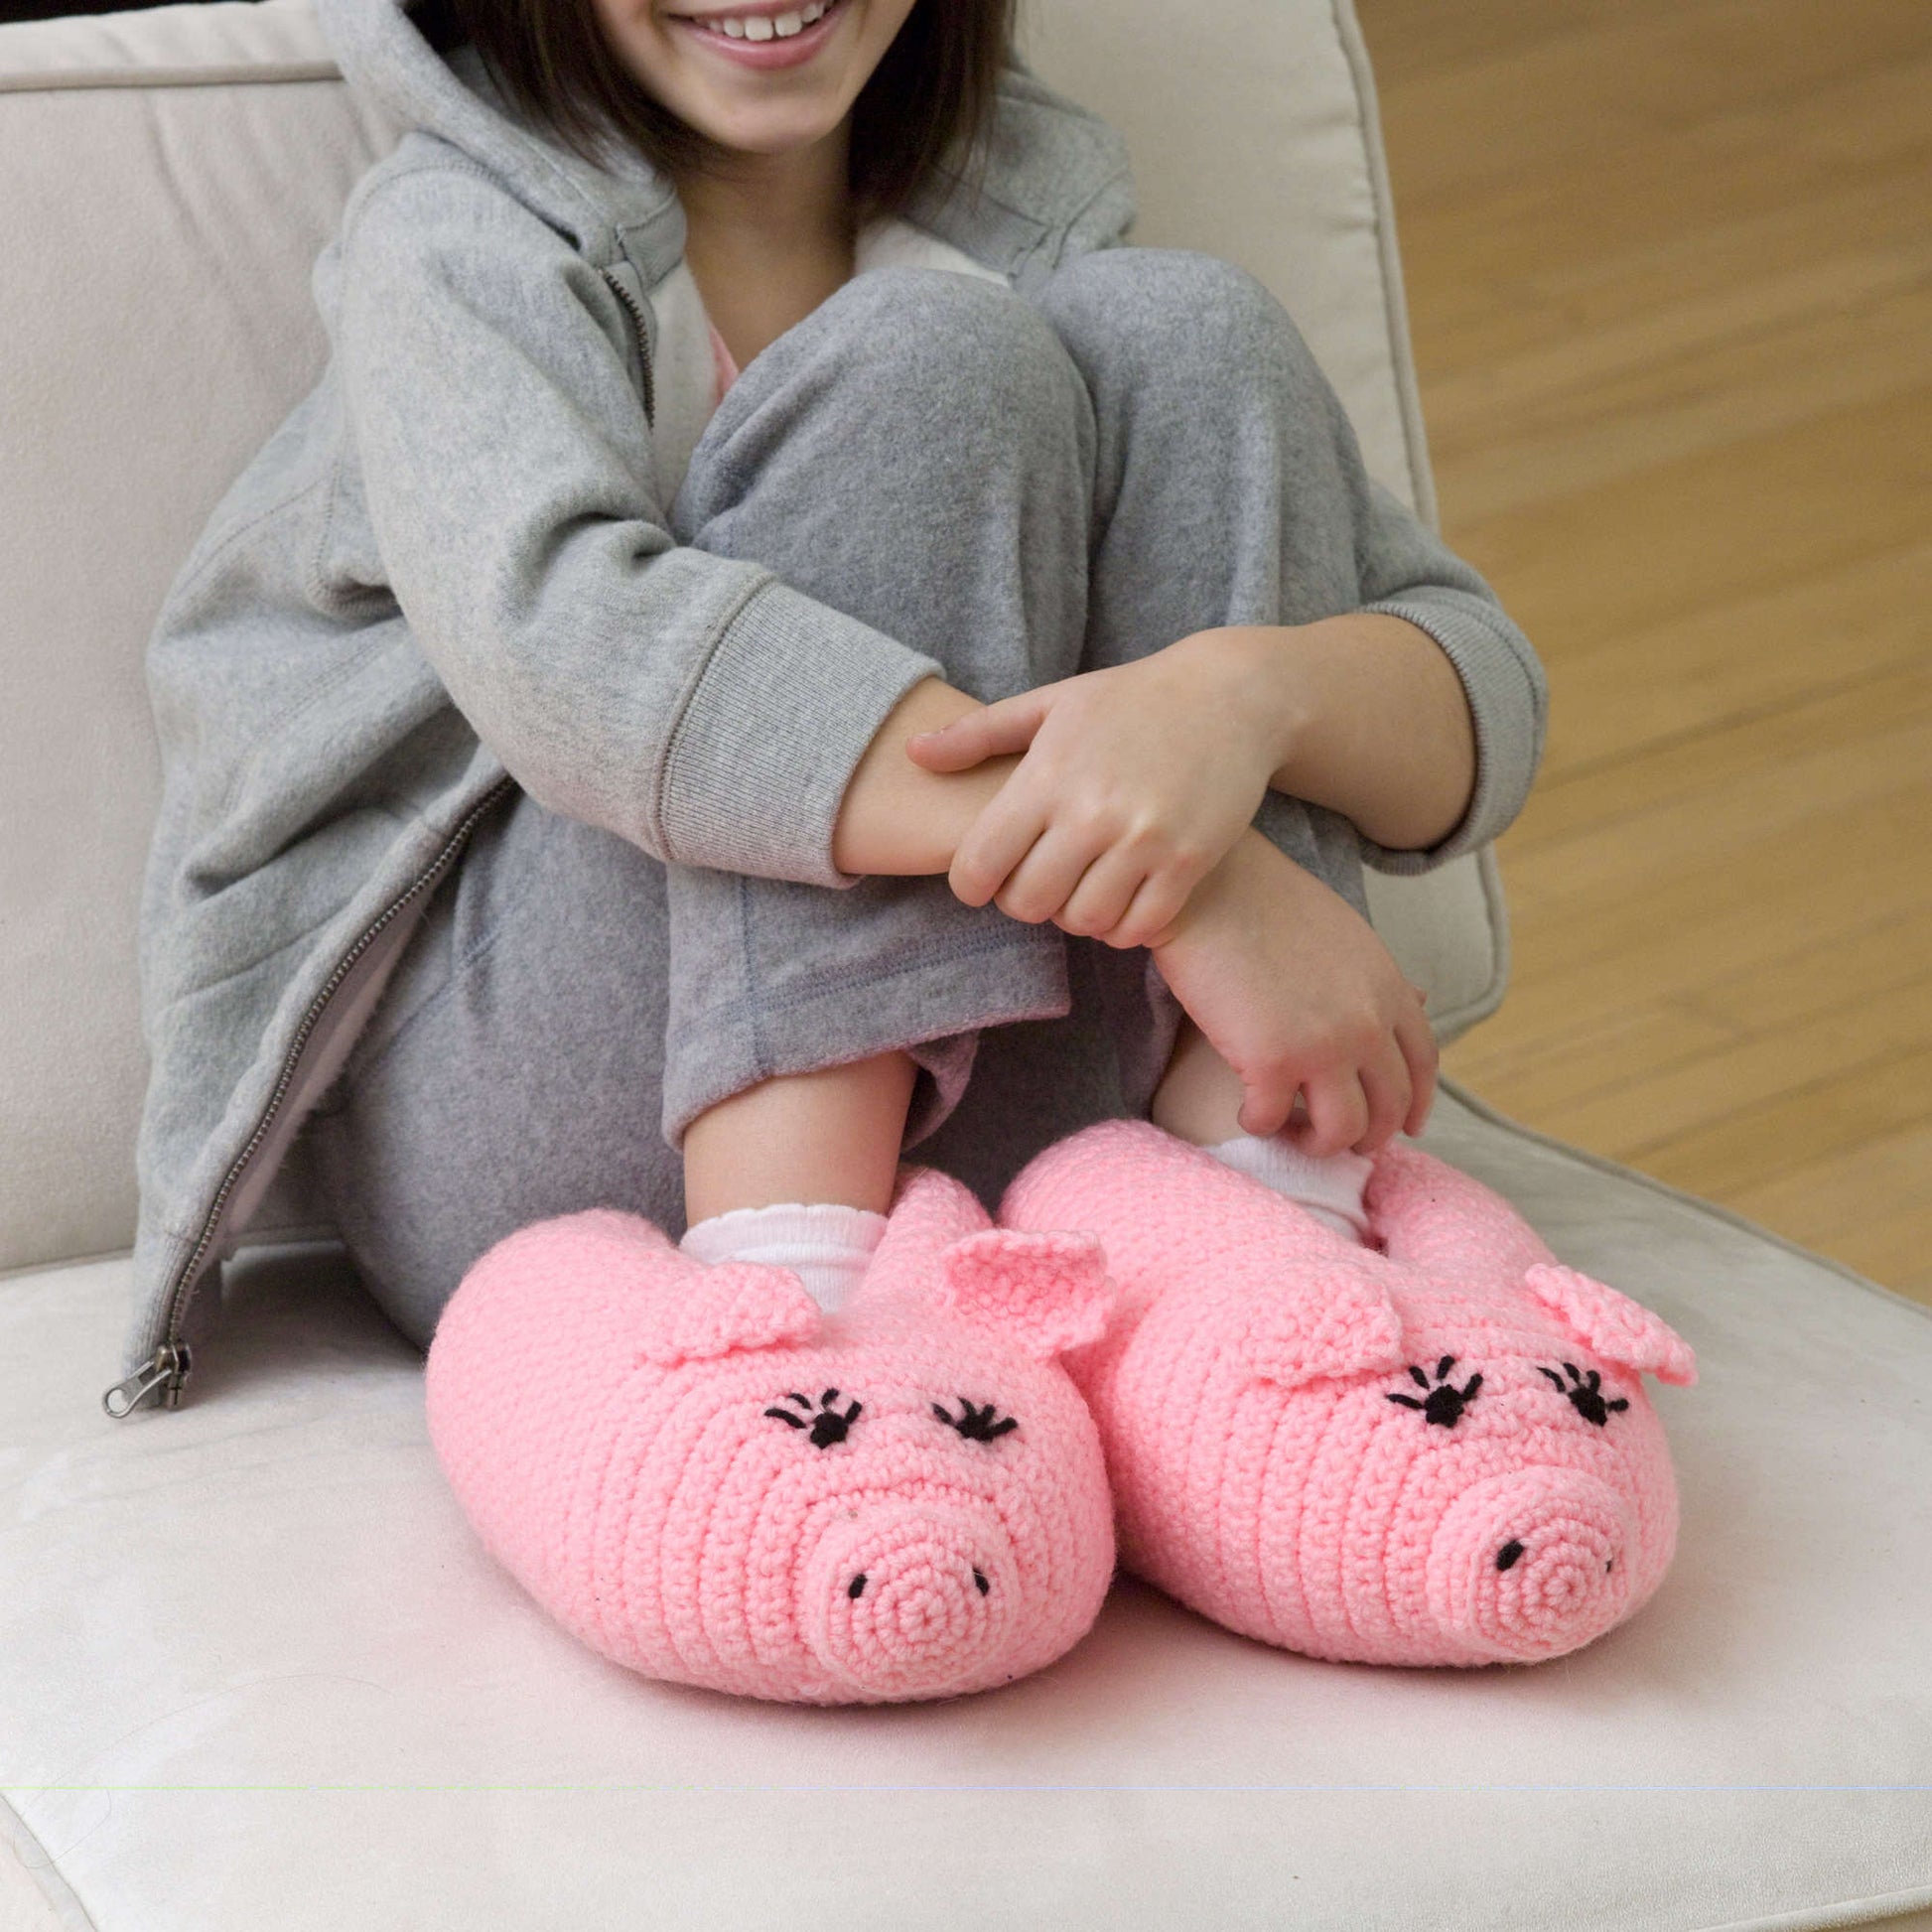 Red Heart Pudgy Piggy Slippers Red Heart Pudgy Piggy Slippers